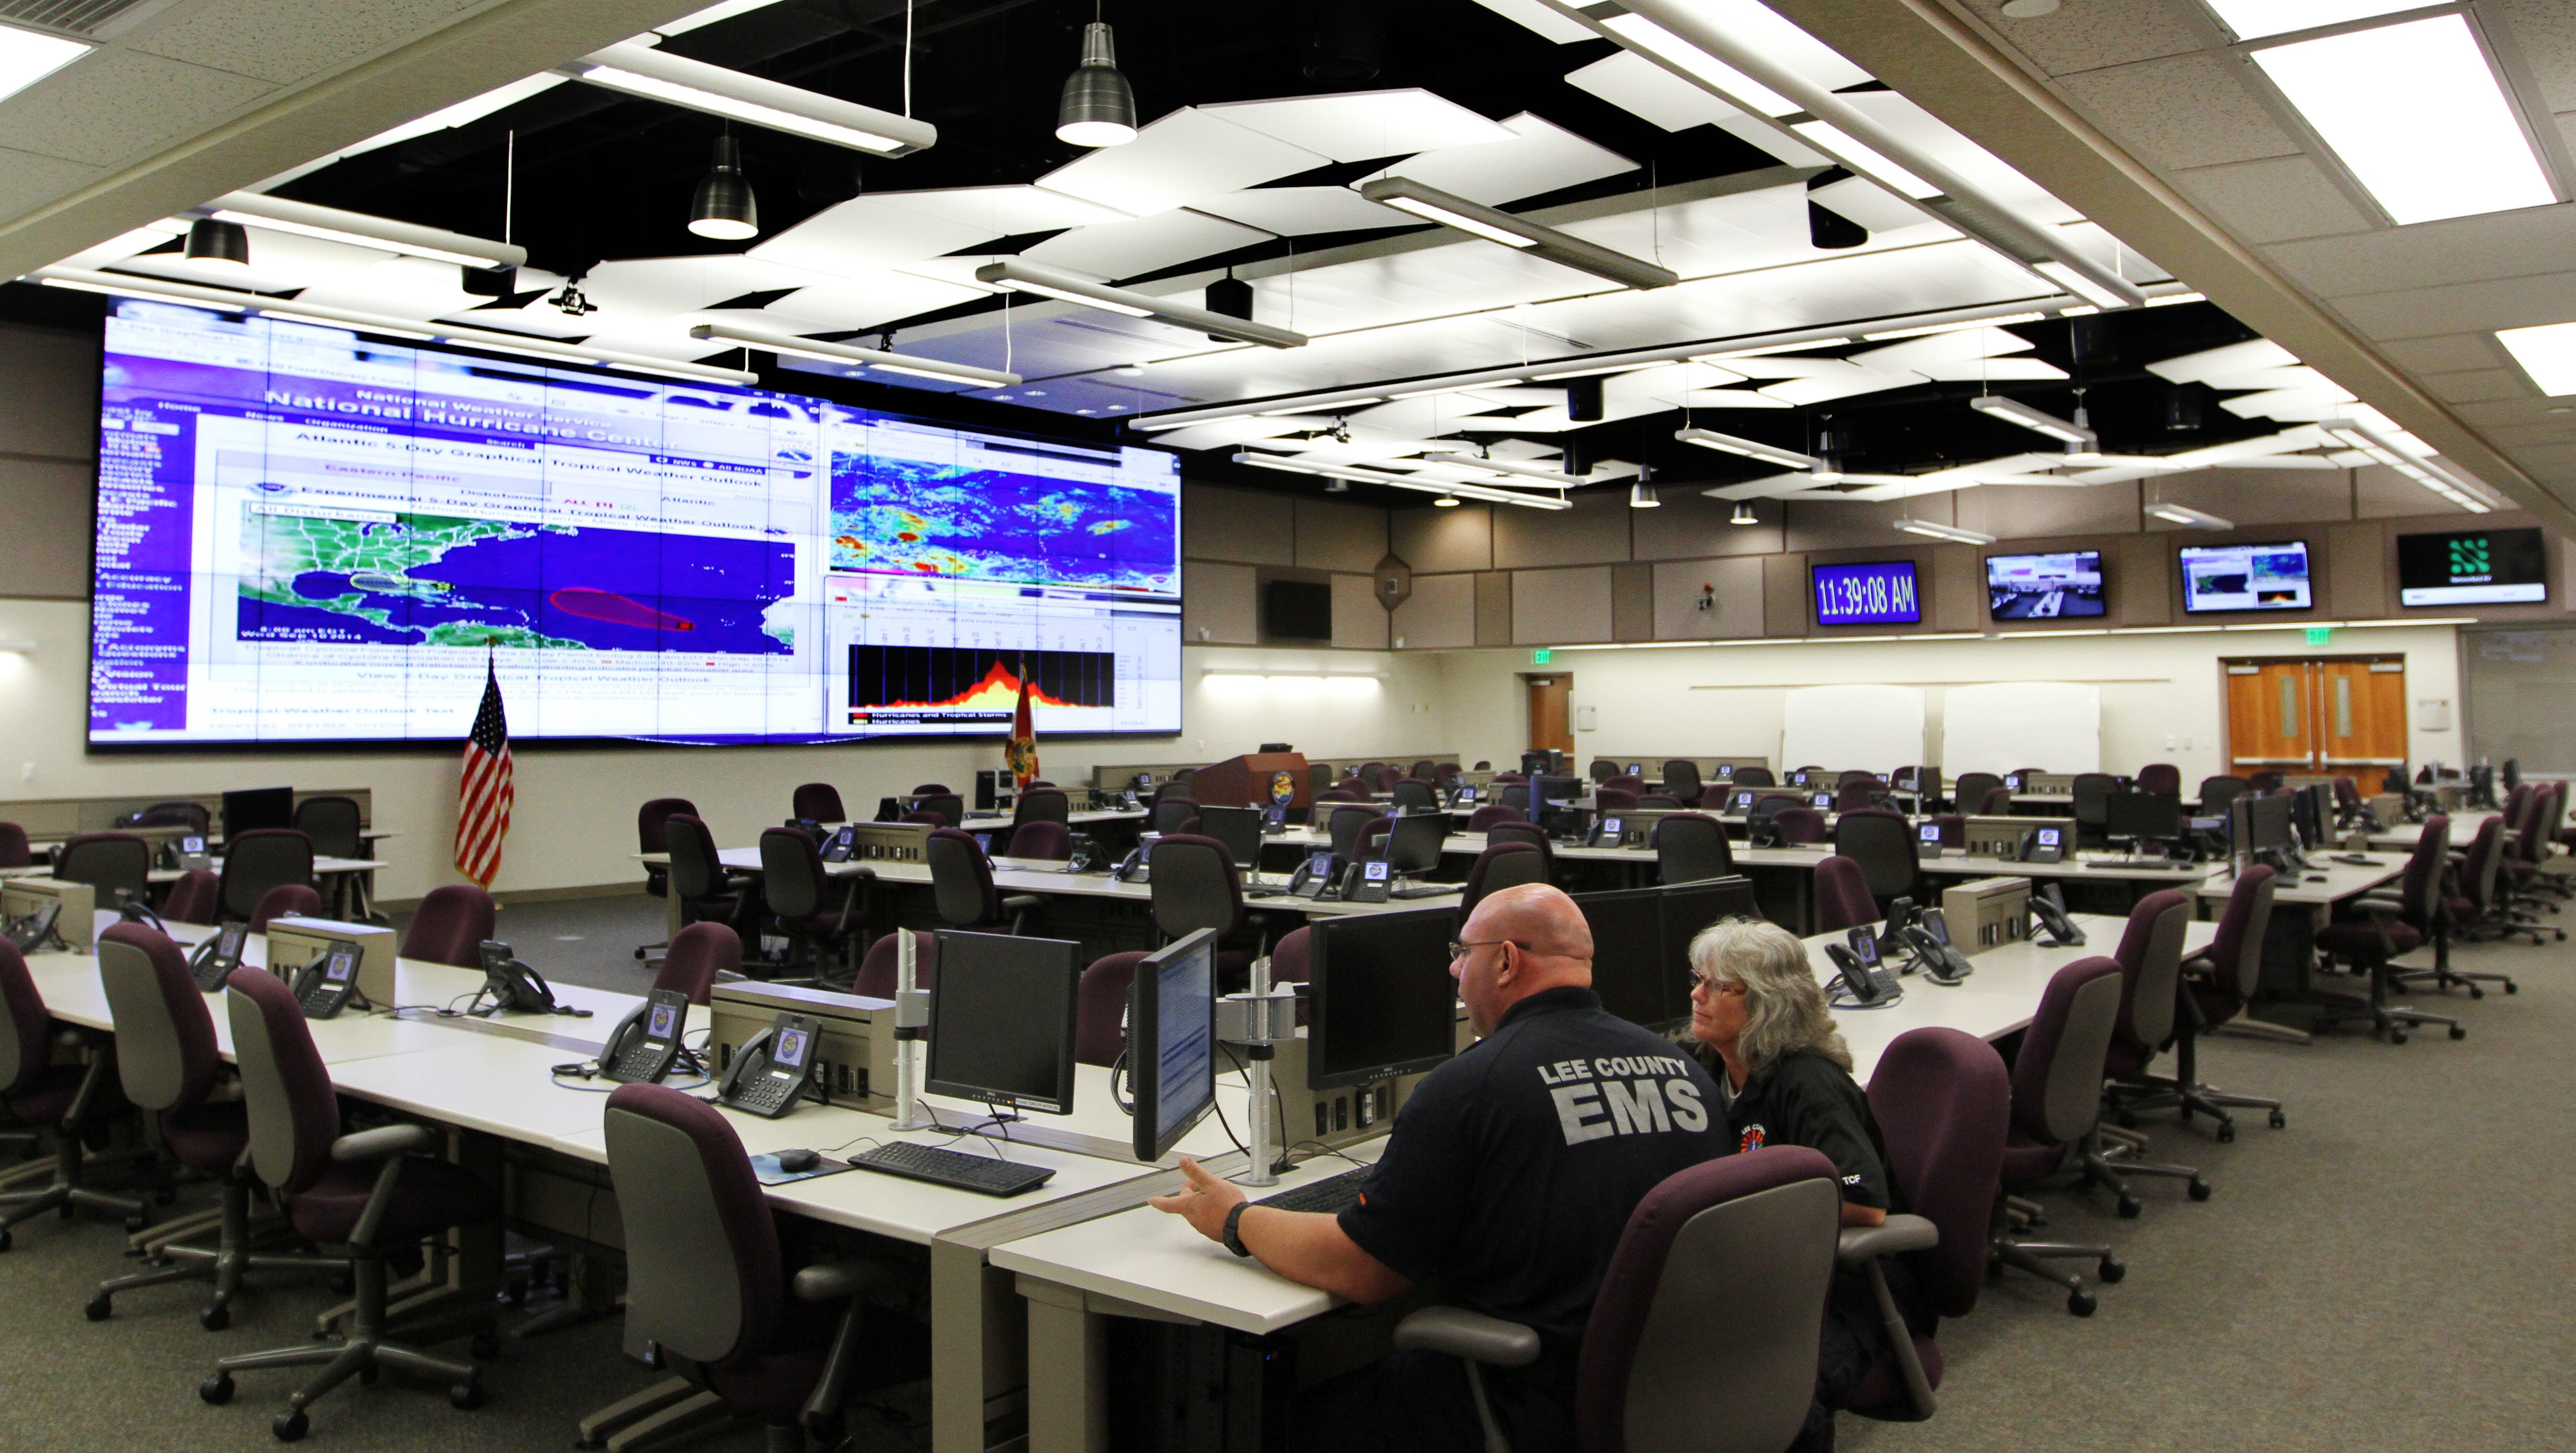 Lee County Emergency Operations Center getting upgrade